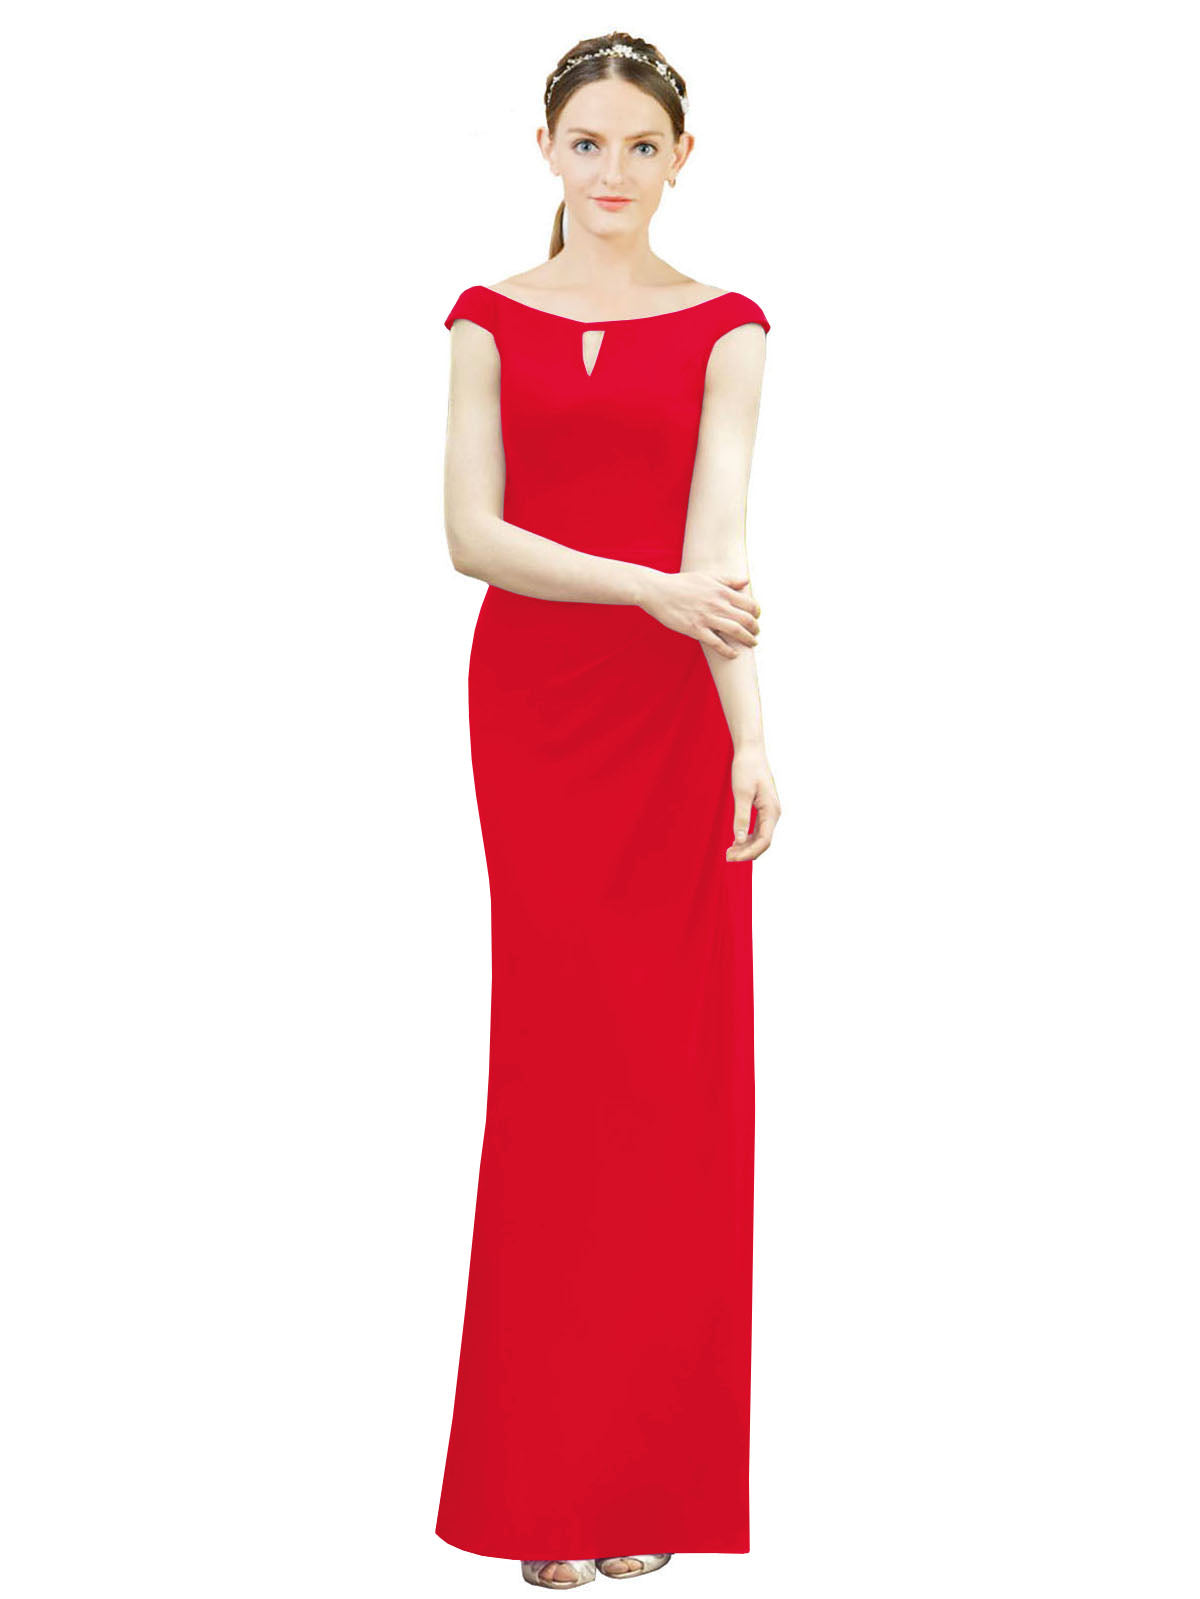 Red Mermaid, Fit and Flare Bateau, High Neck Sleeveless Long Bridesmaid Dress Emilee 